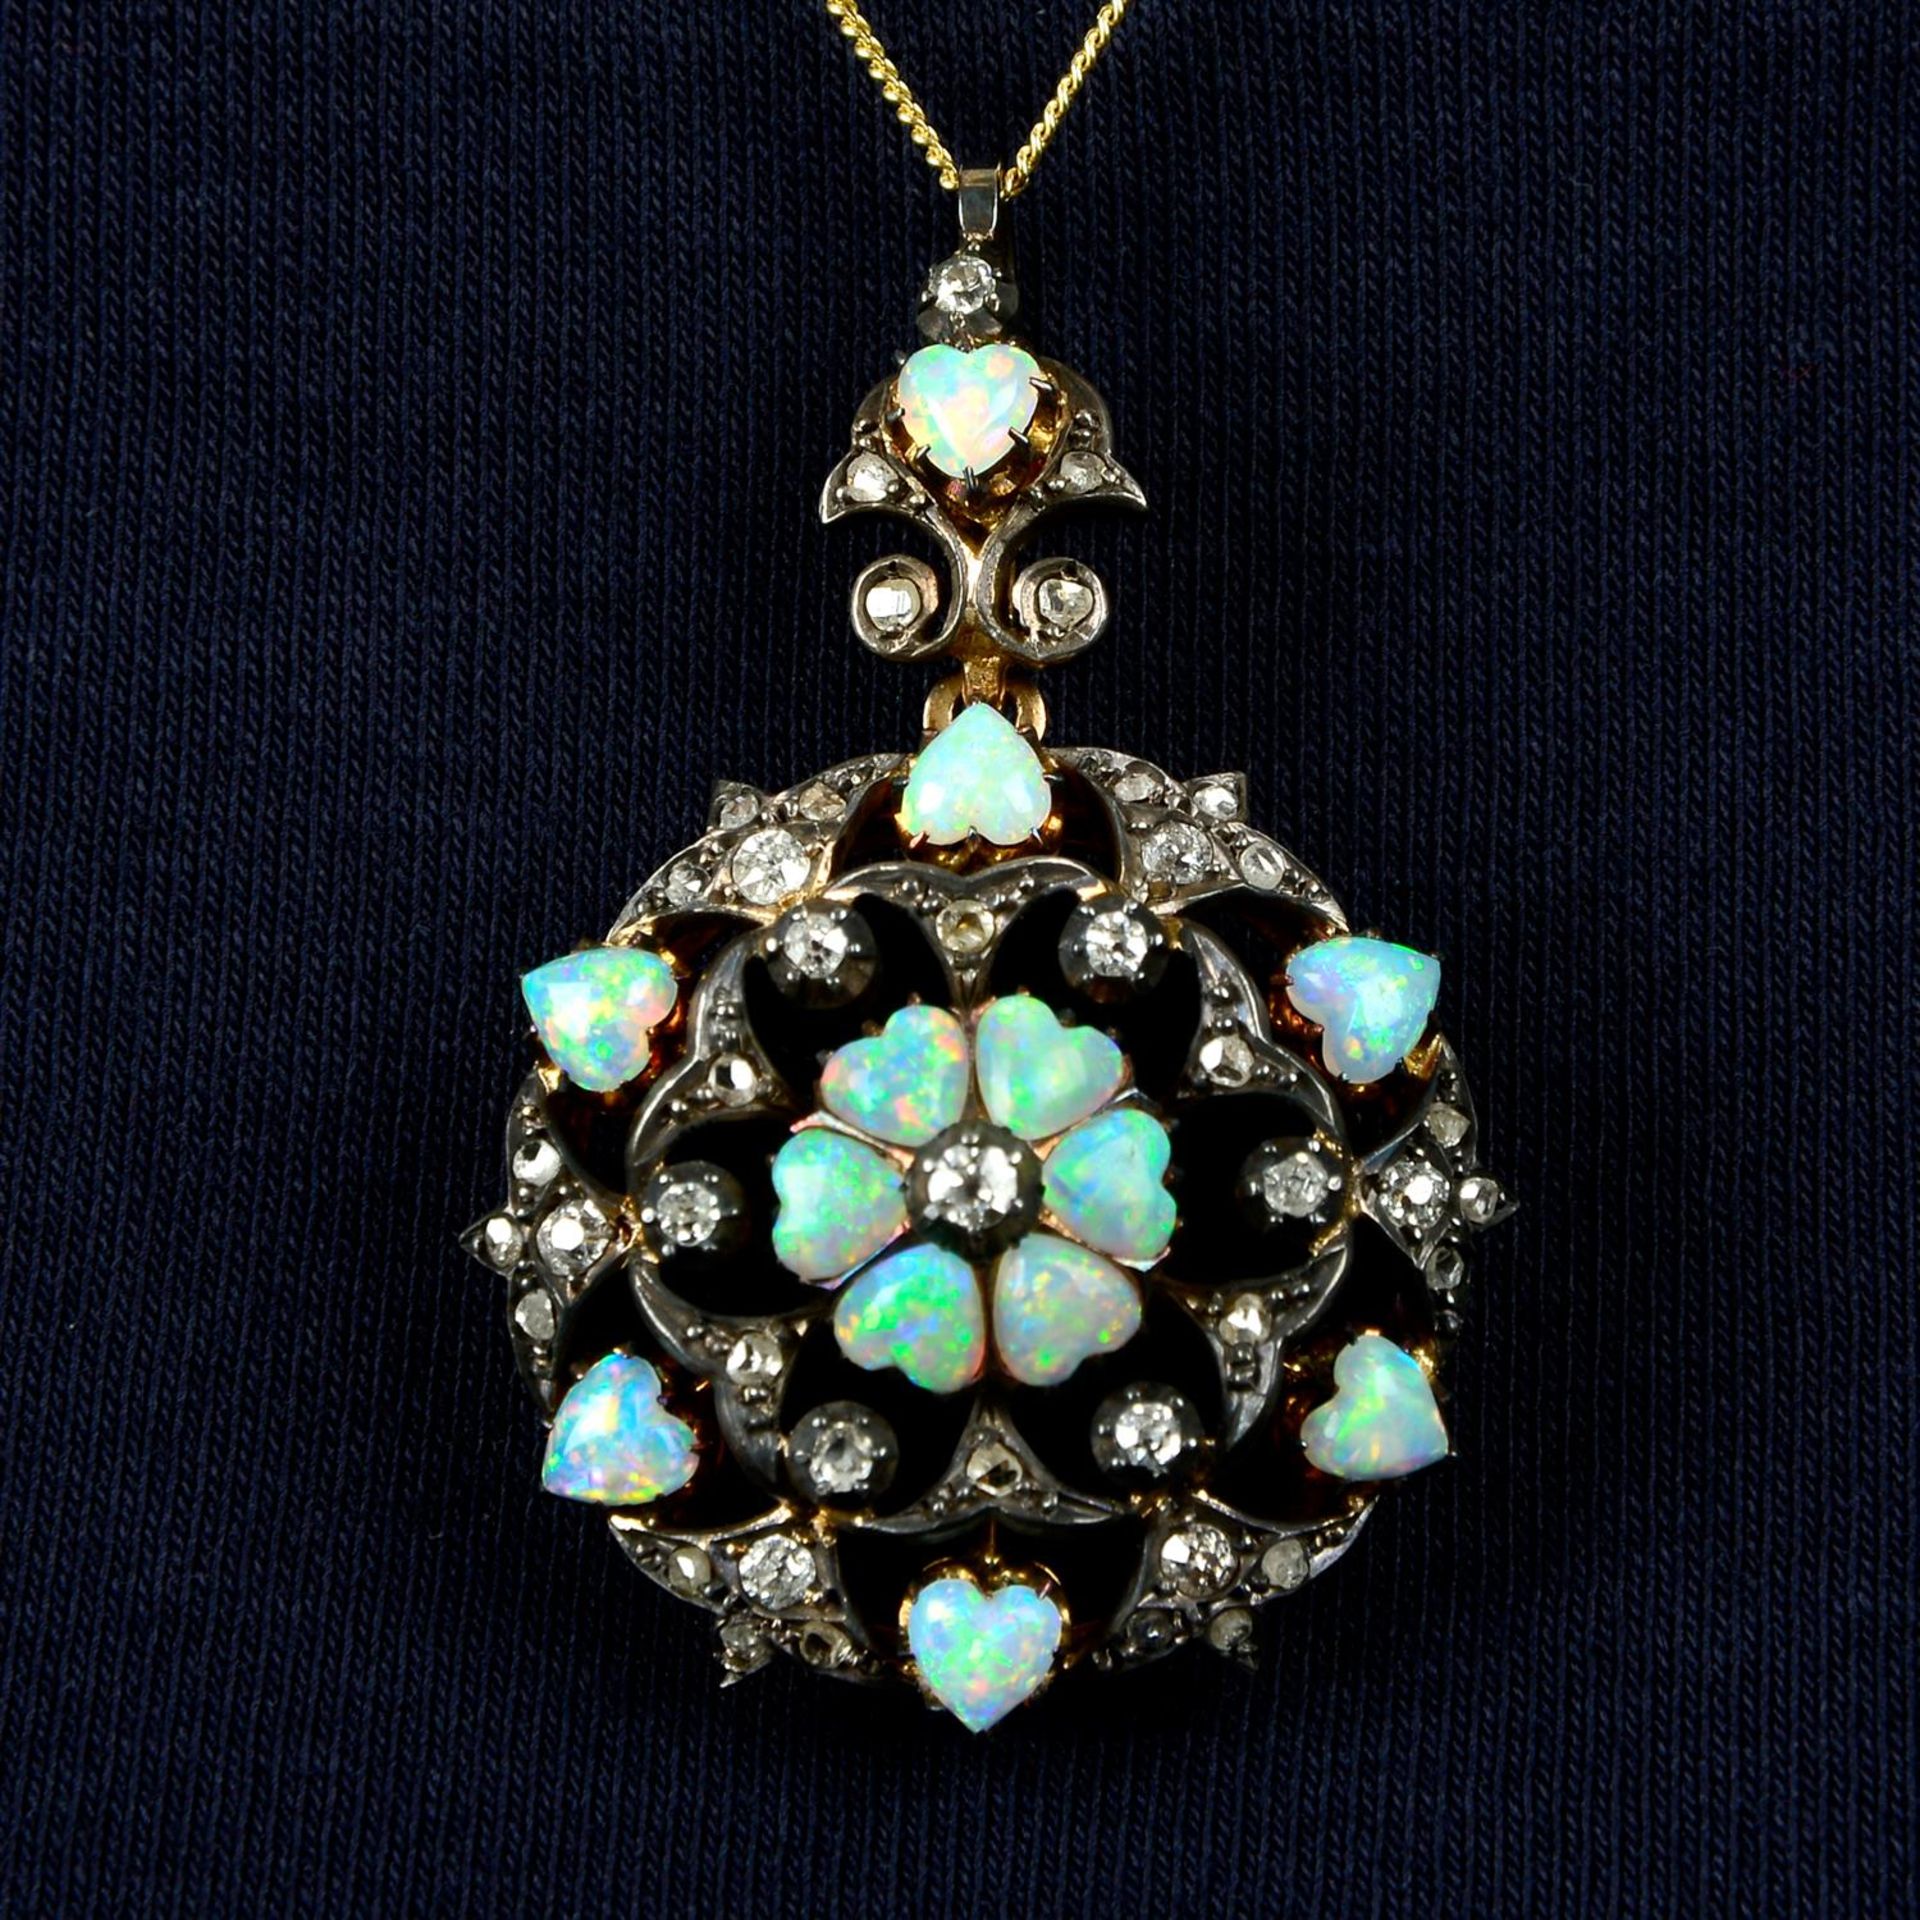 A silver and gold, late 19th century opal heart and diamond pendant/brooch.